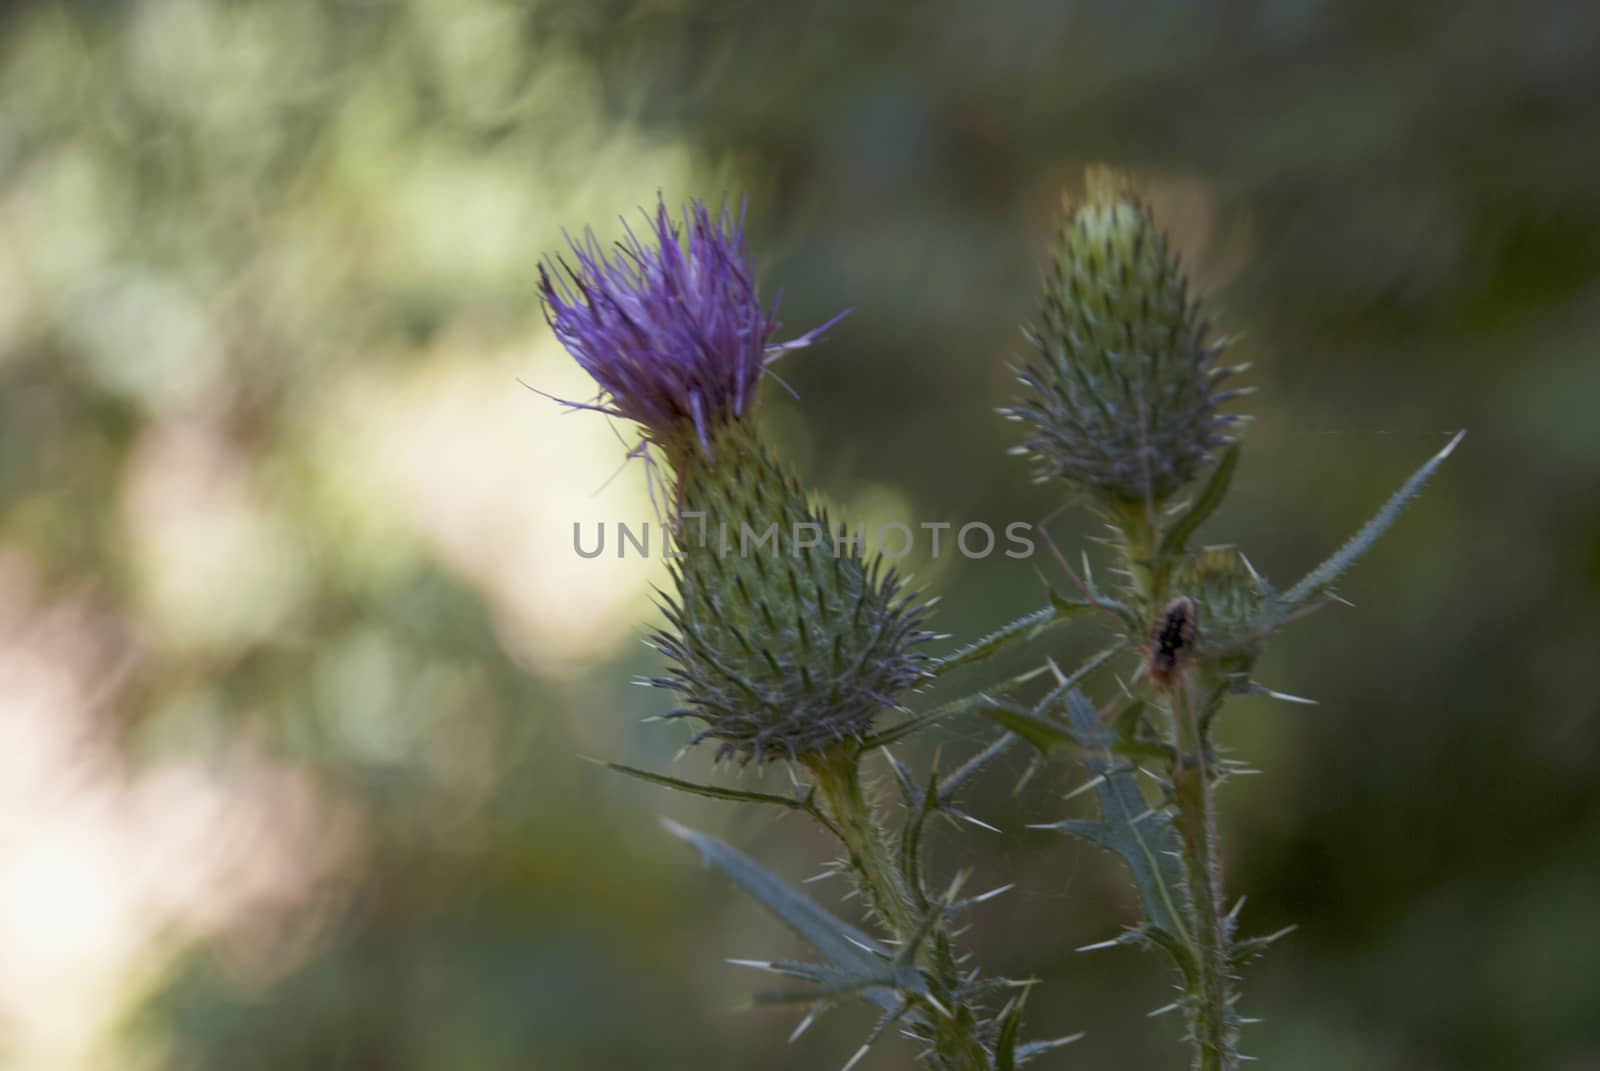 Used in the field of herbal medicine Thistle flower, symbol of Scotland